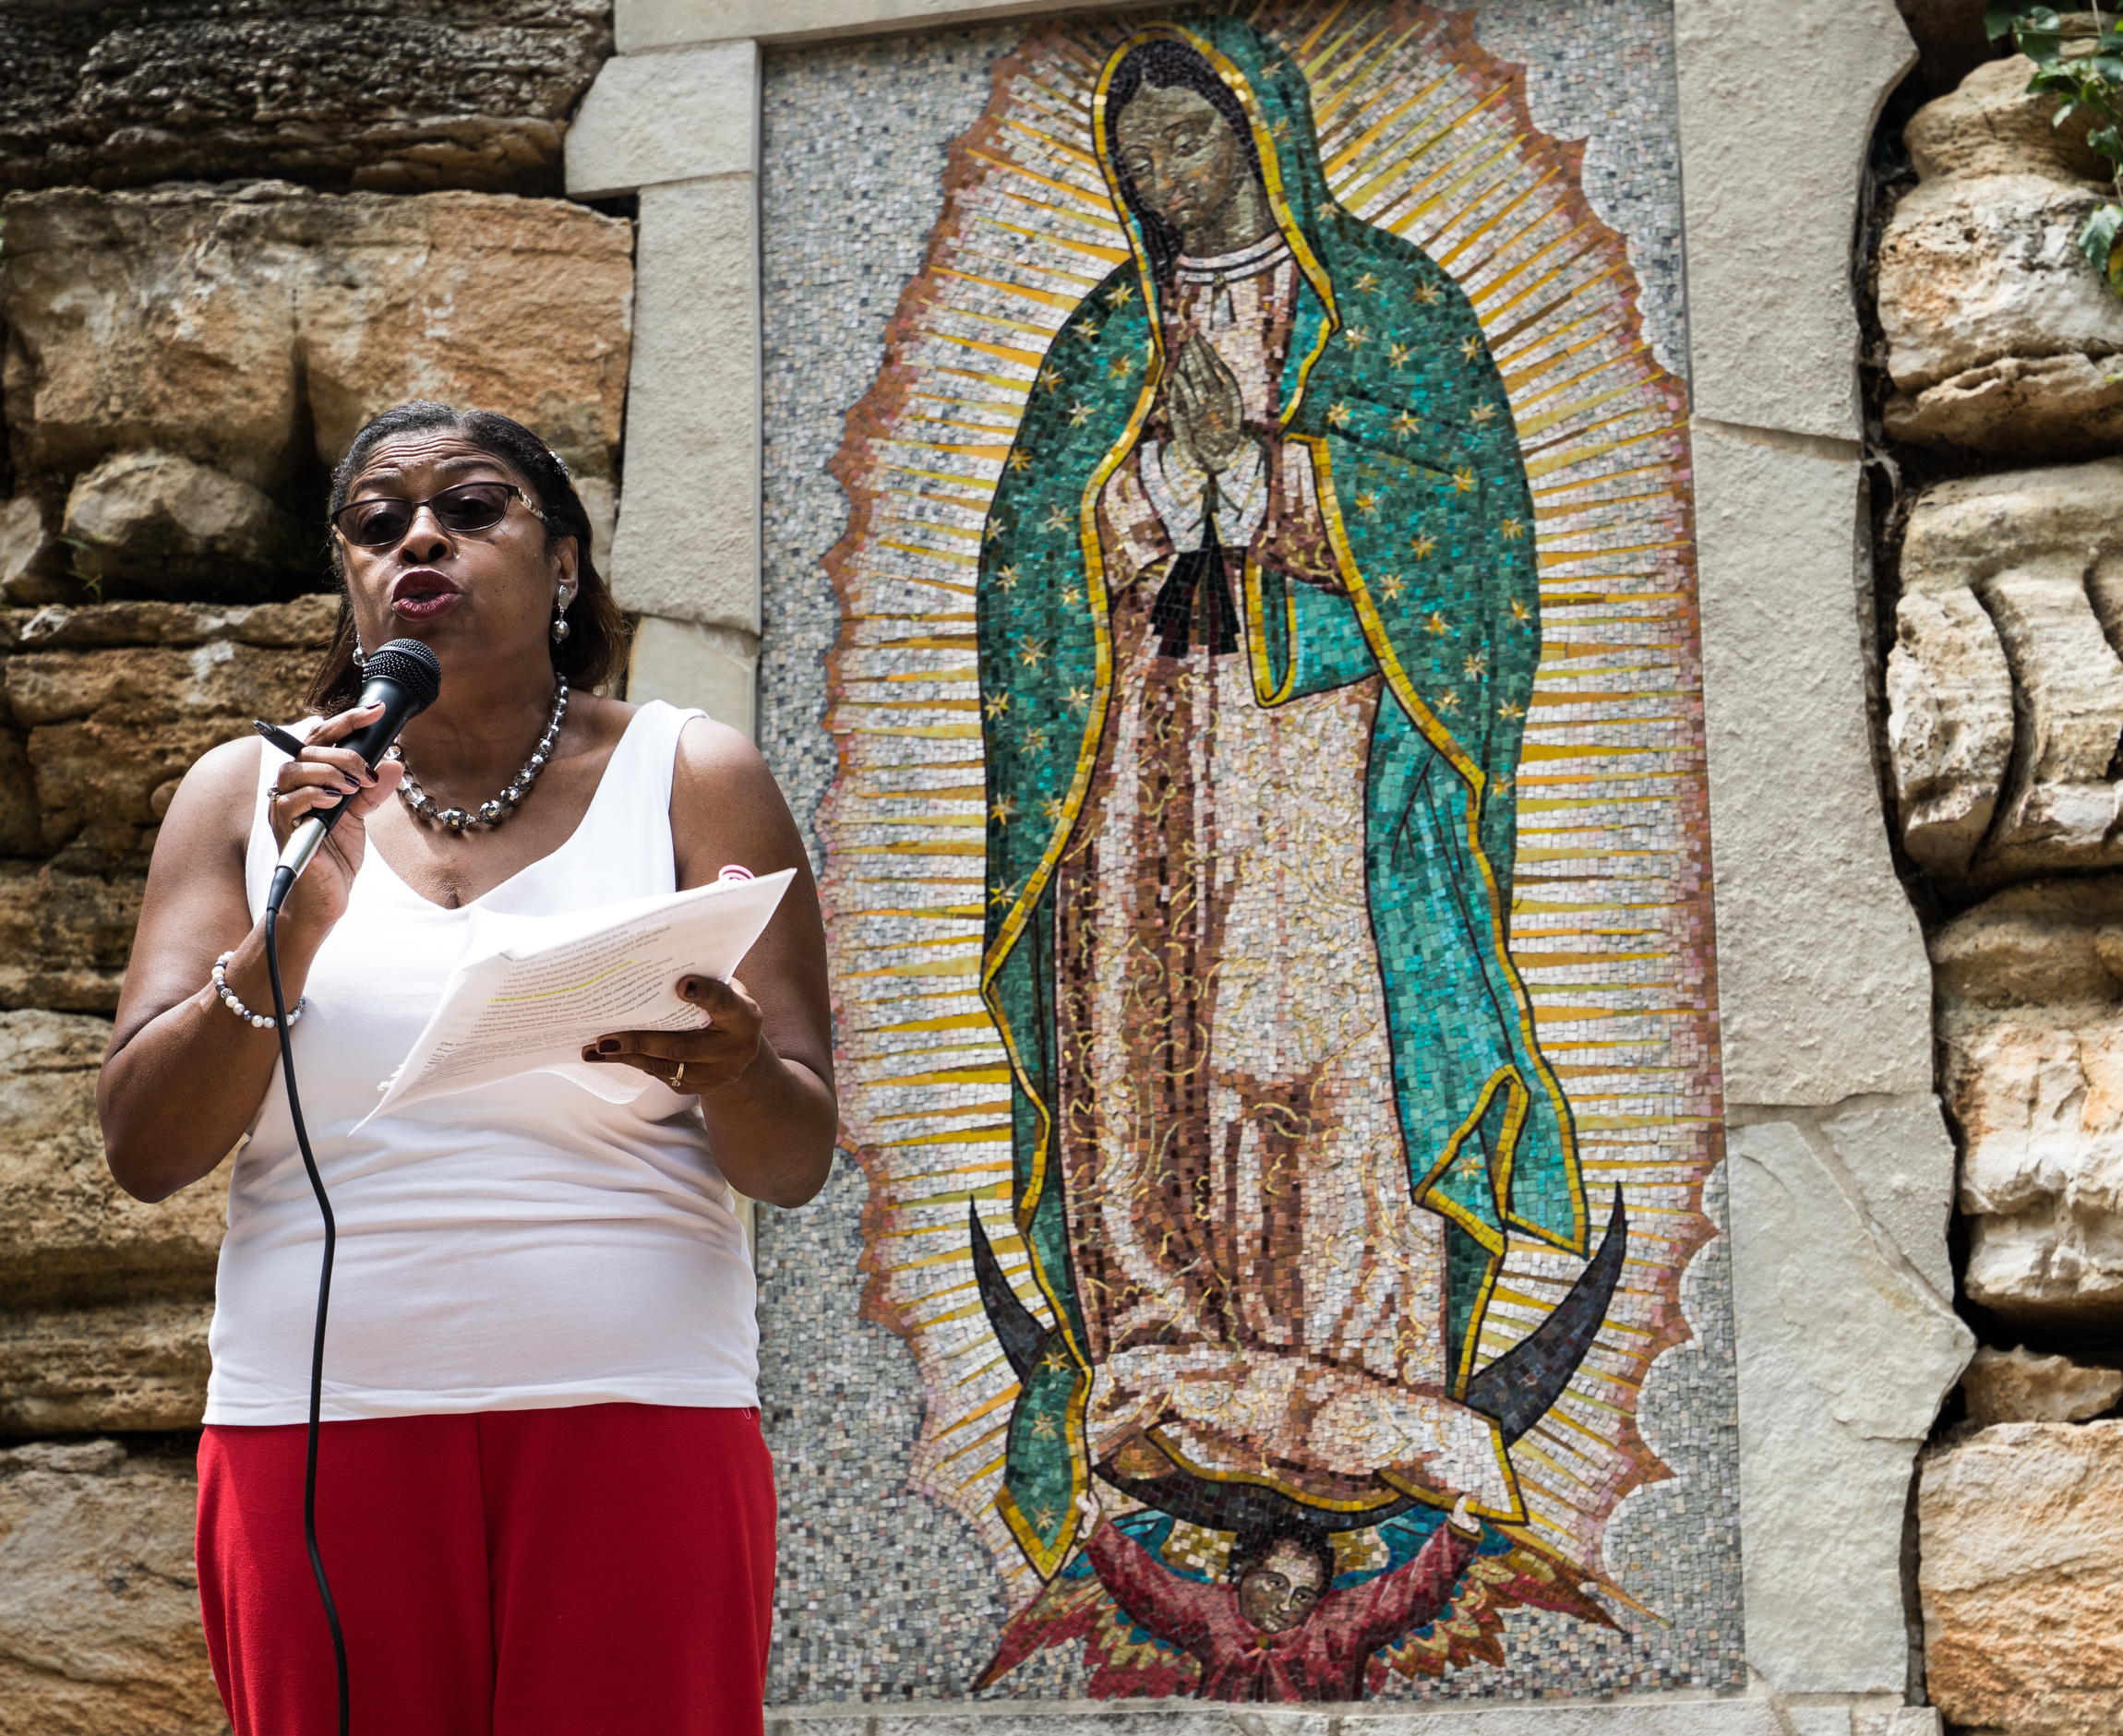 A woman speaks during an Aug. 5 ecumenical prayer service at grotto at Our Lady of Guadalupe Church in Ferguson, Mo. The service commemorated the first anniversary of the shooting death of 18-year-old Michael Brown. (CNS photo/Weston Kenney, St. Louis Review)